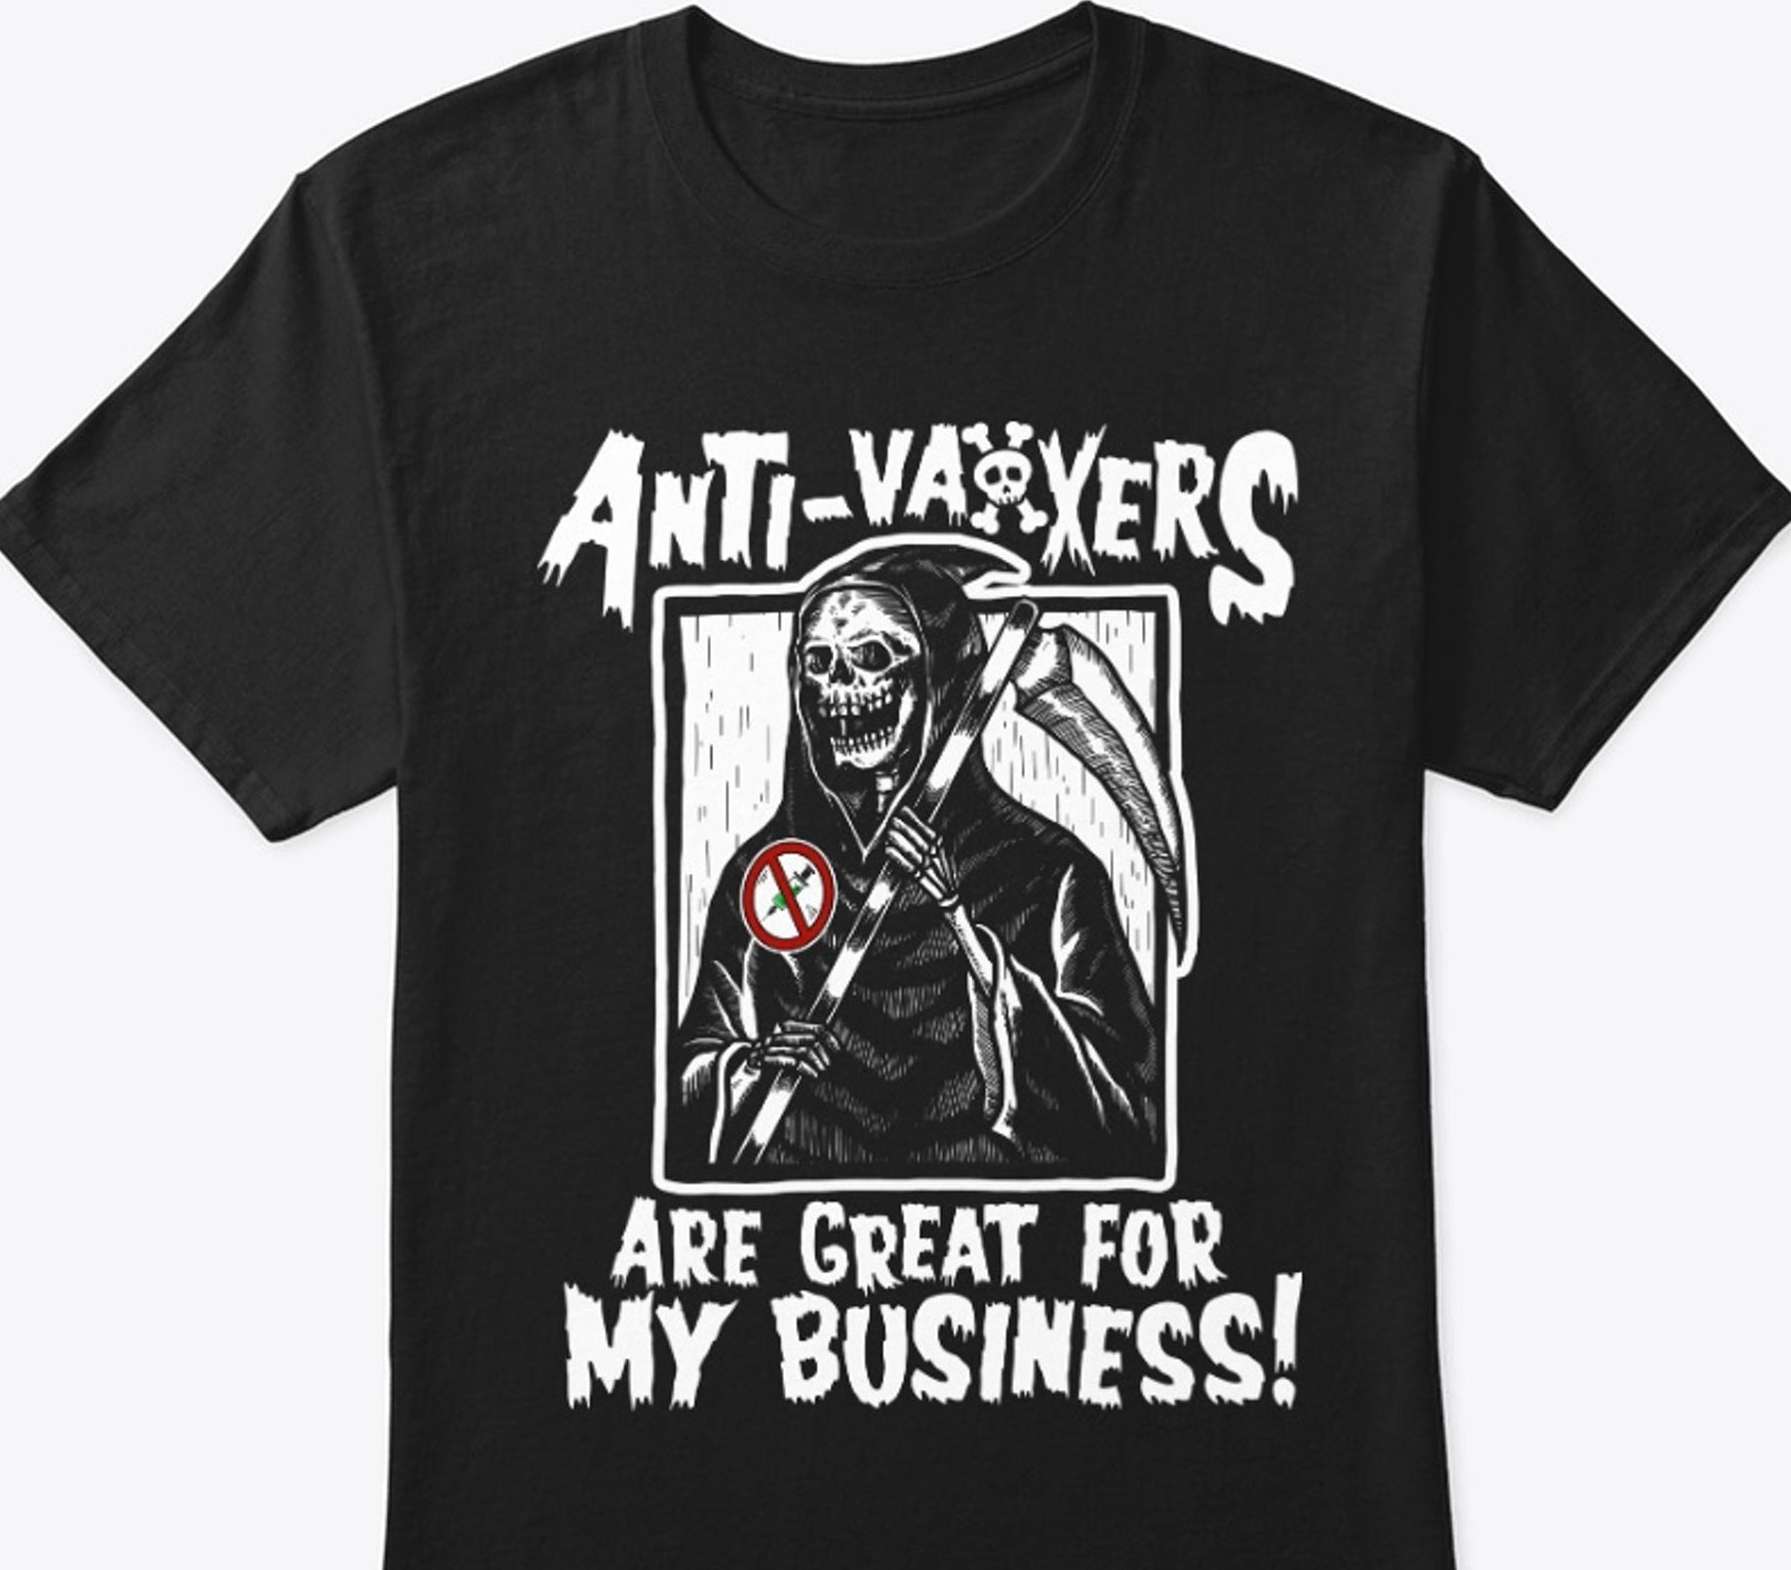 Anti vaxxers are great for my business - Covid-19 anti vaxxers, the devil business